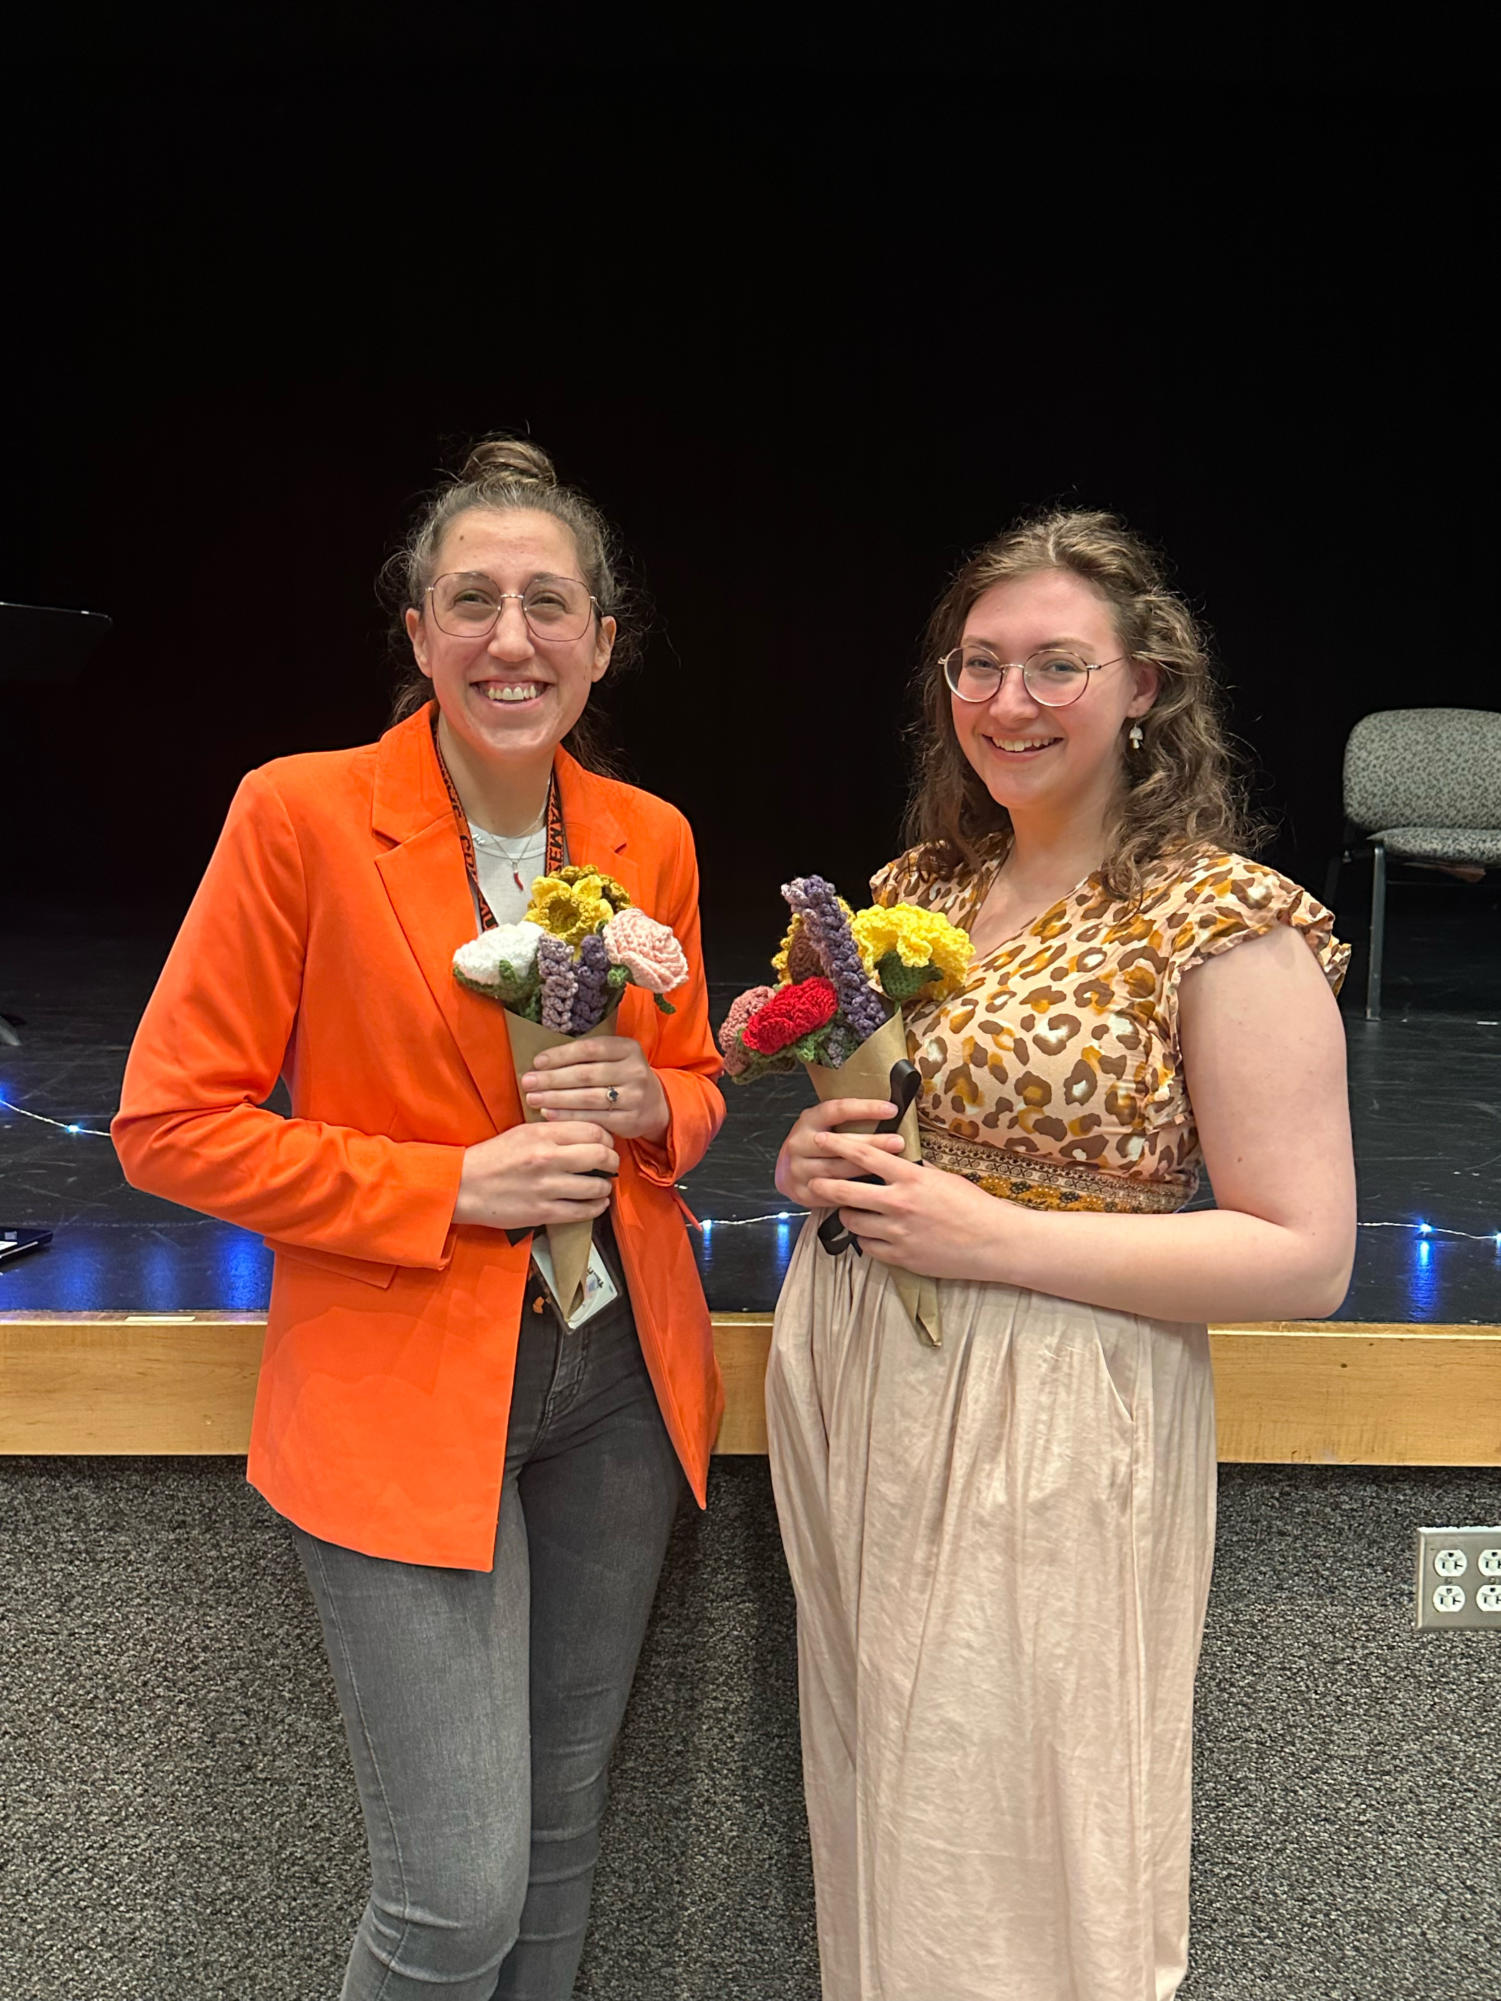 Assistant coach Ms. Eden Henrikson (right) will take over the Communitys Speech team as head coach for the 2023-24 season.
Photo Courtesy of: 